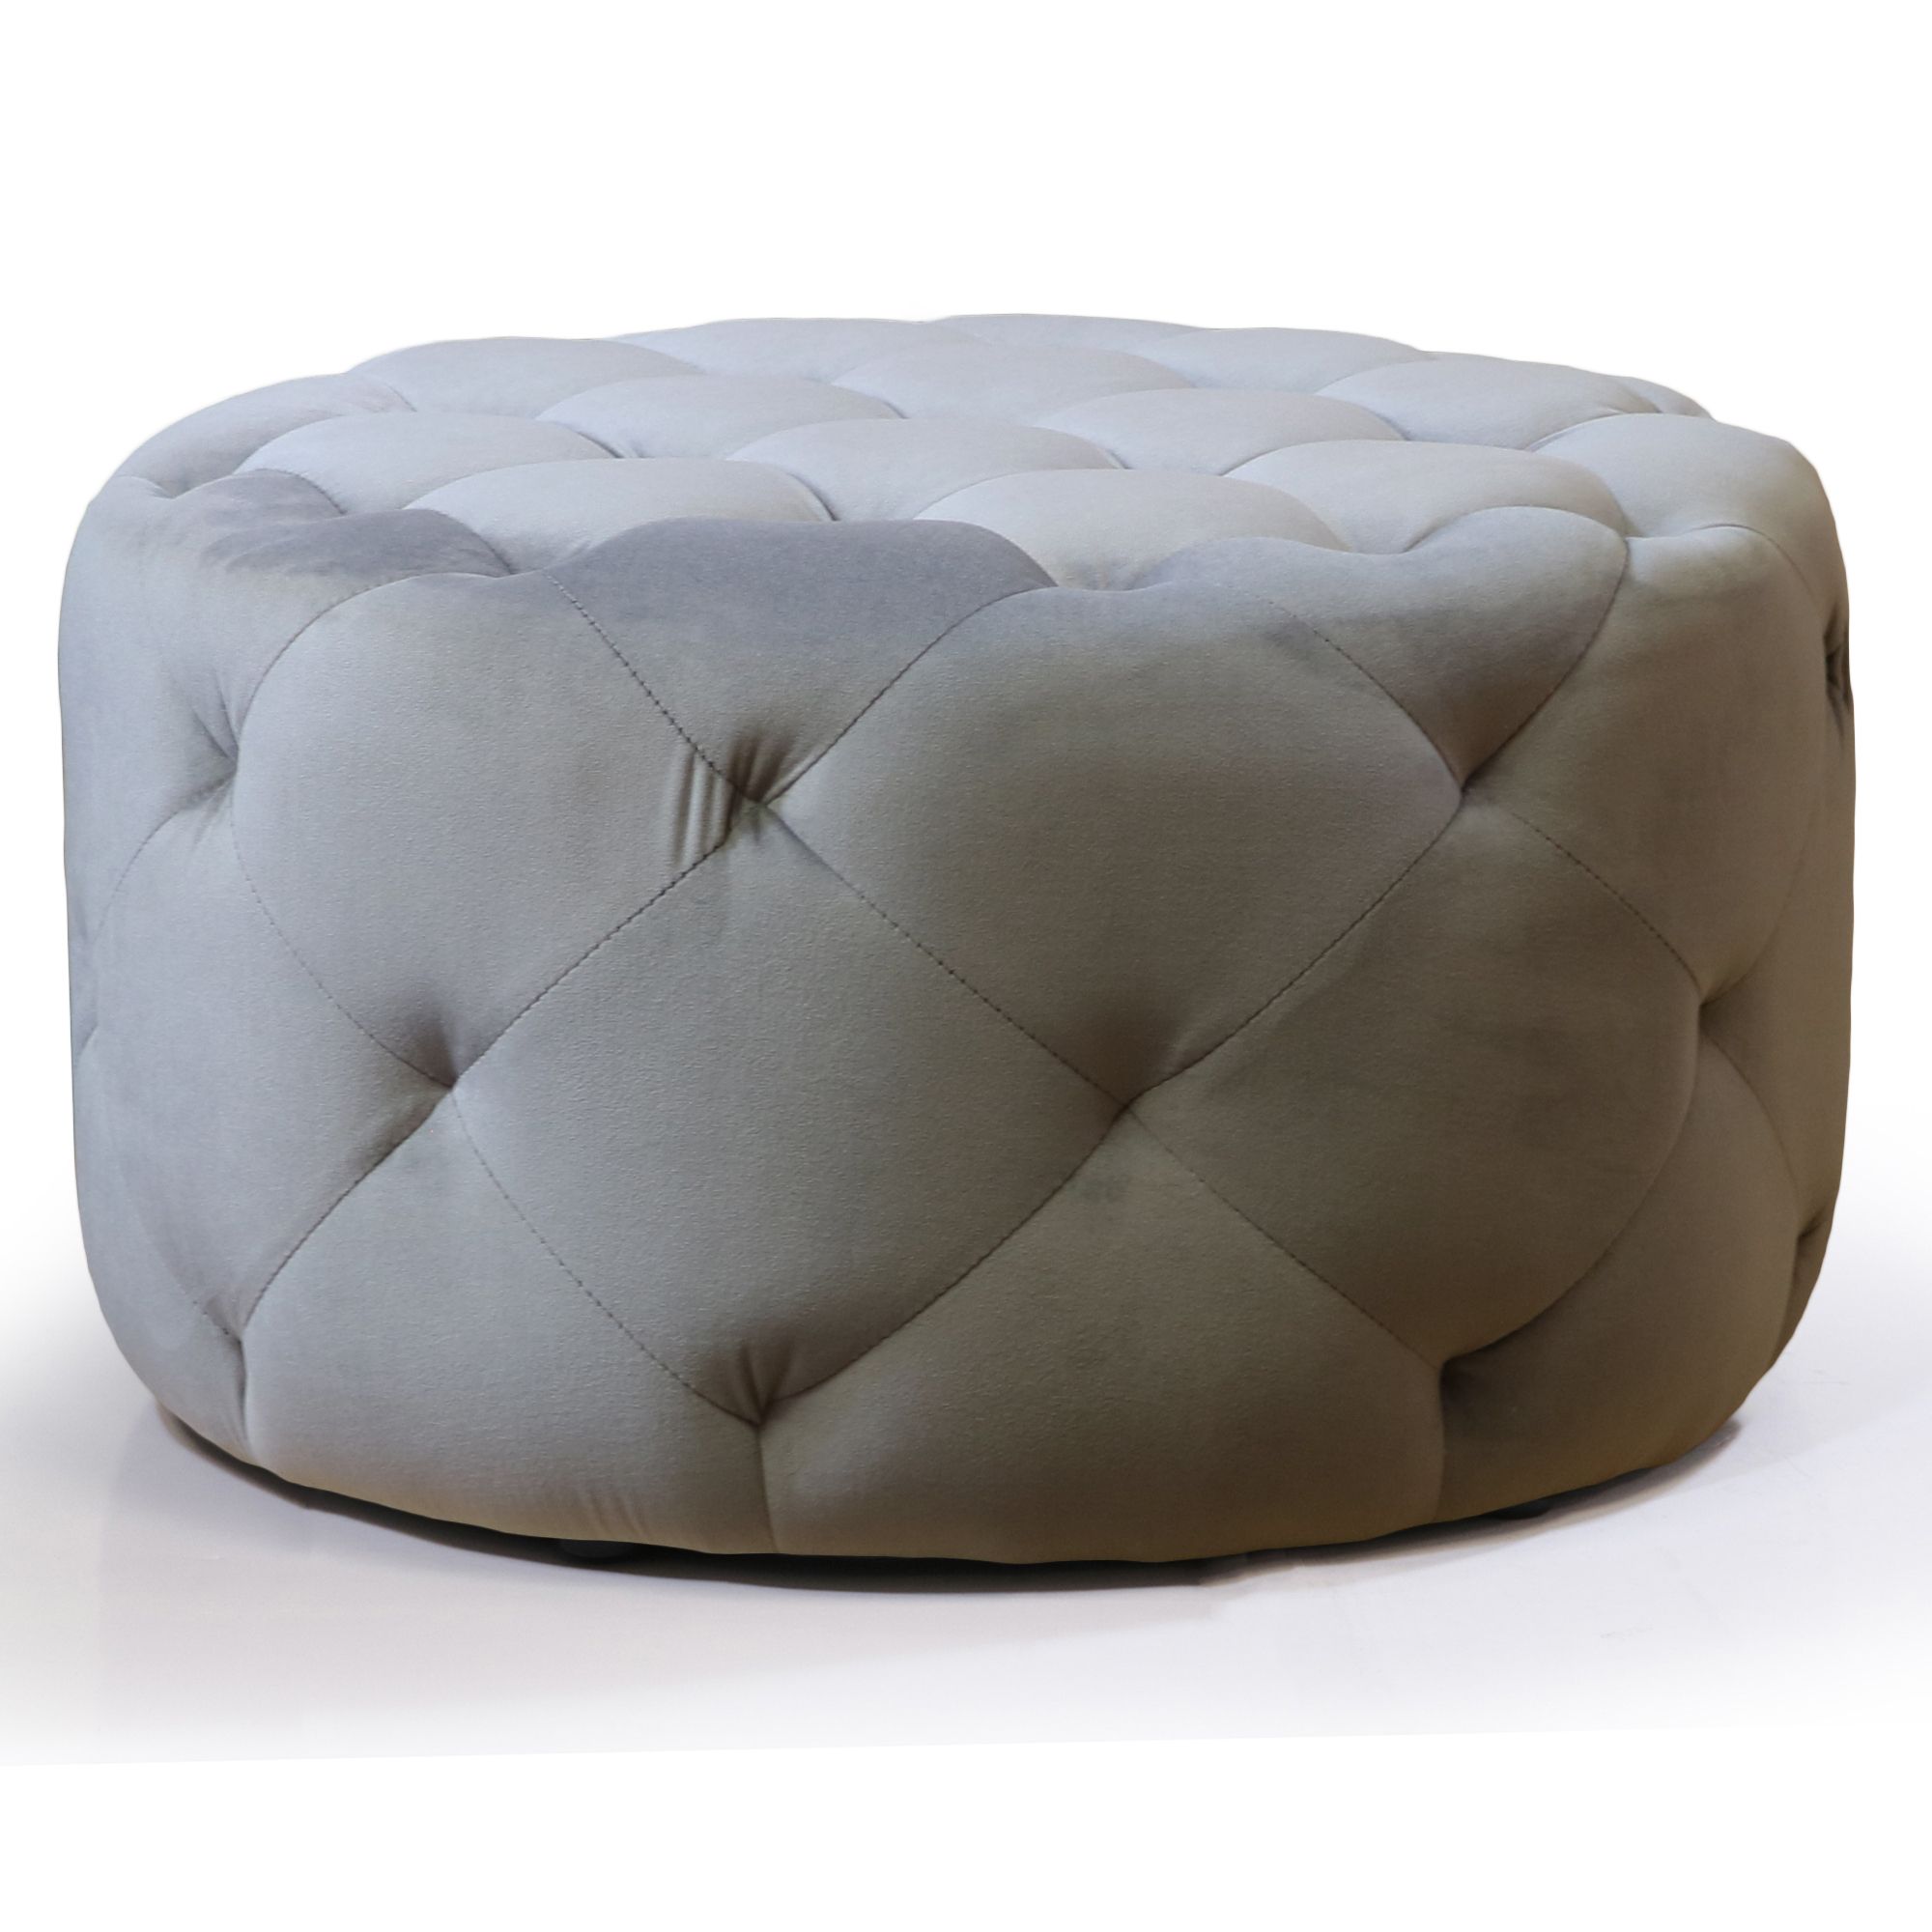 Most Recent Textured Aqua Round Pouf Ottomans Within Warehouse Of Tiffany Meerna 24 Inch Round Tufted Padded Ottoman (View 7 of 10)